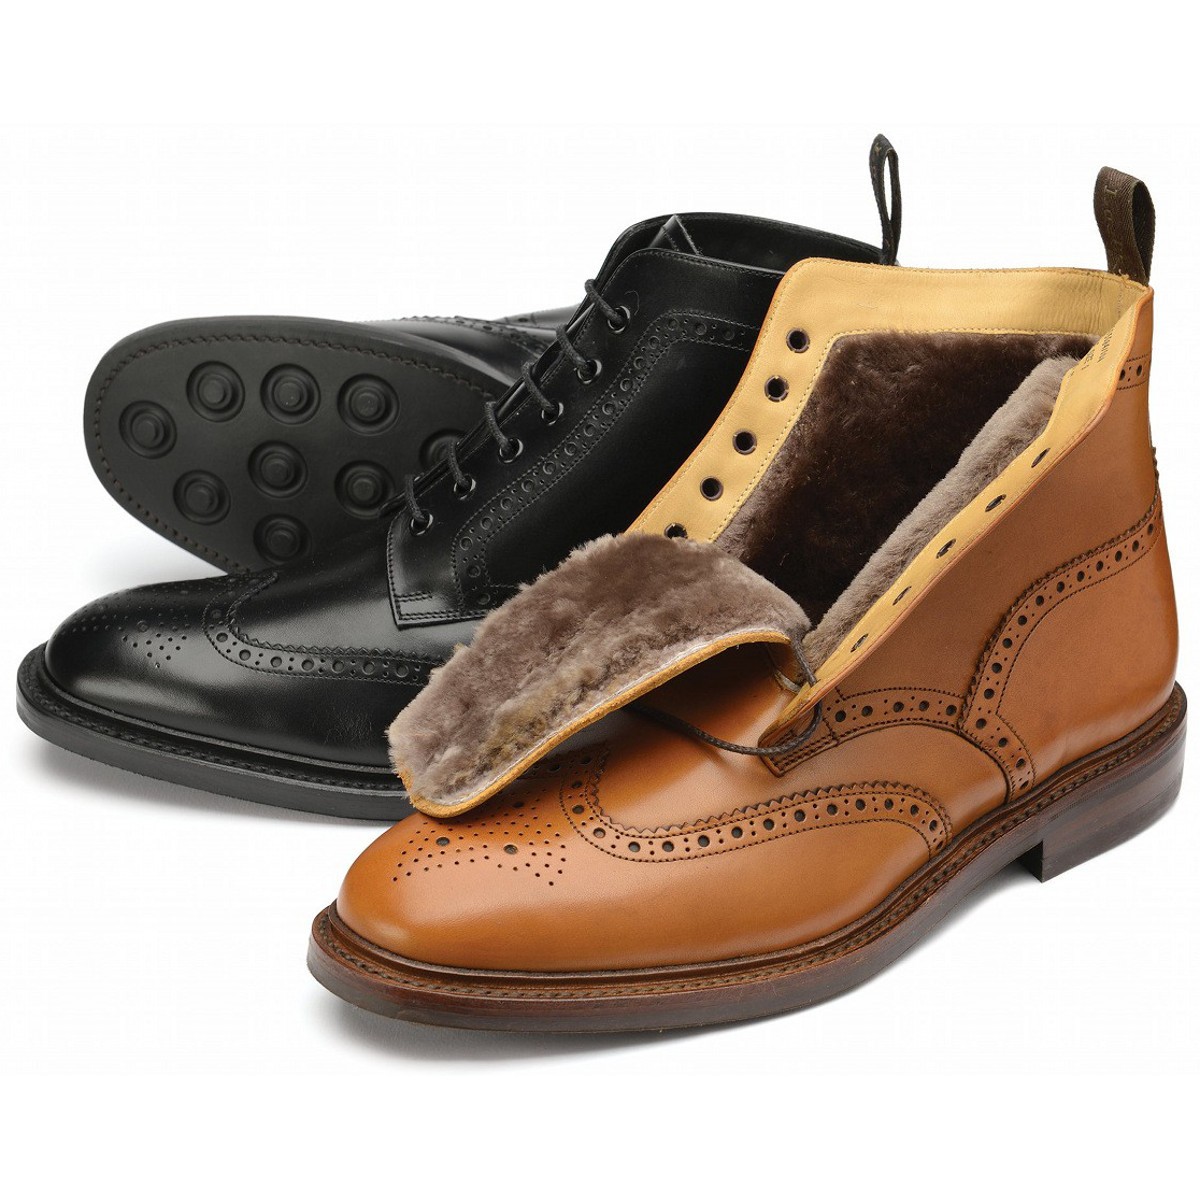 loake boots sale cheap online